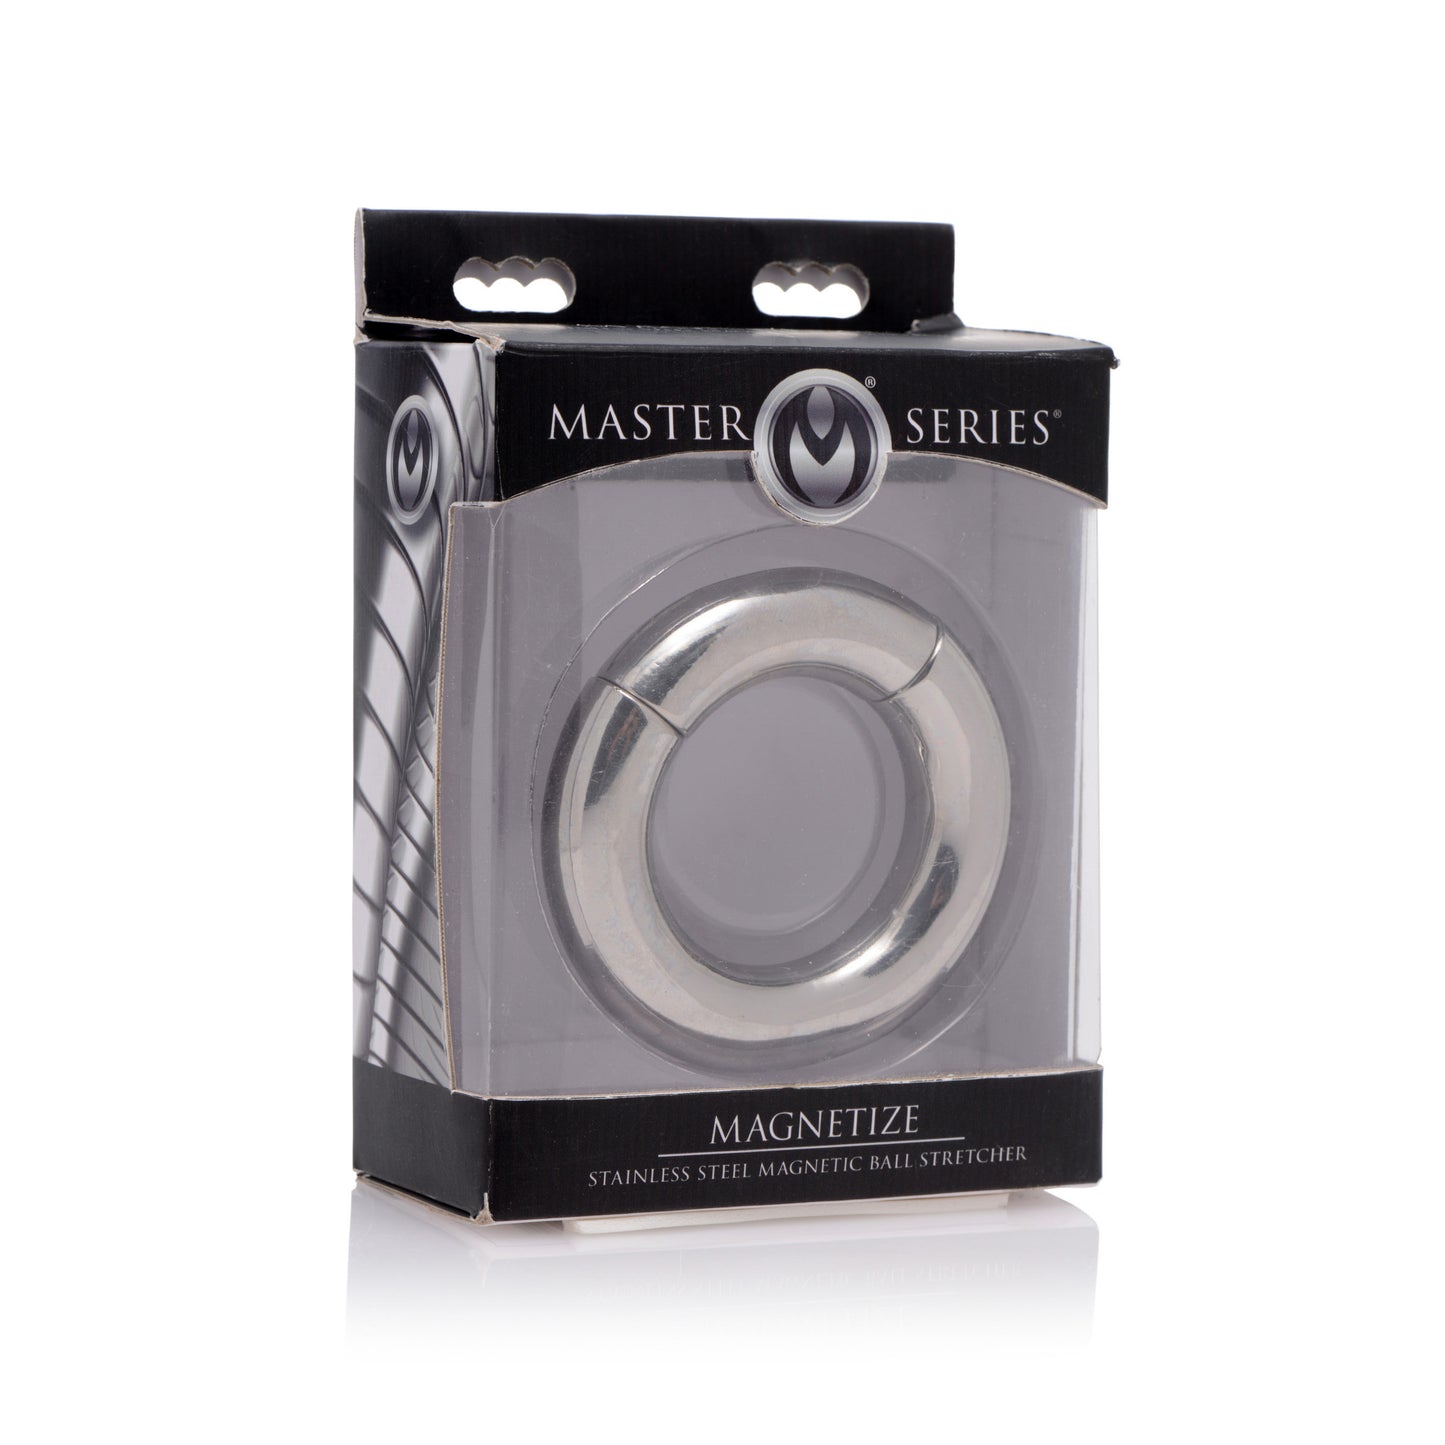 Magnetize Stainless Steel Magnetic Ball Stretcher - UABDSM